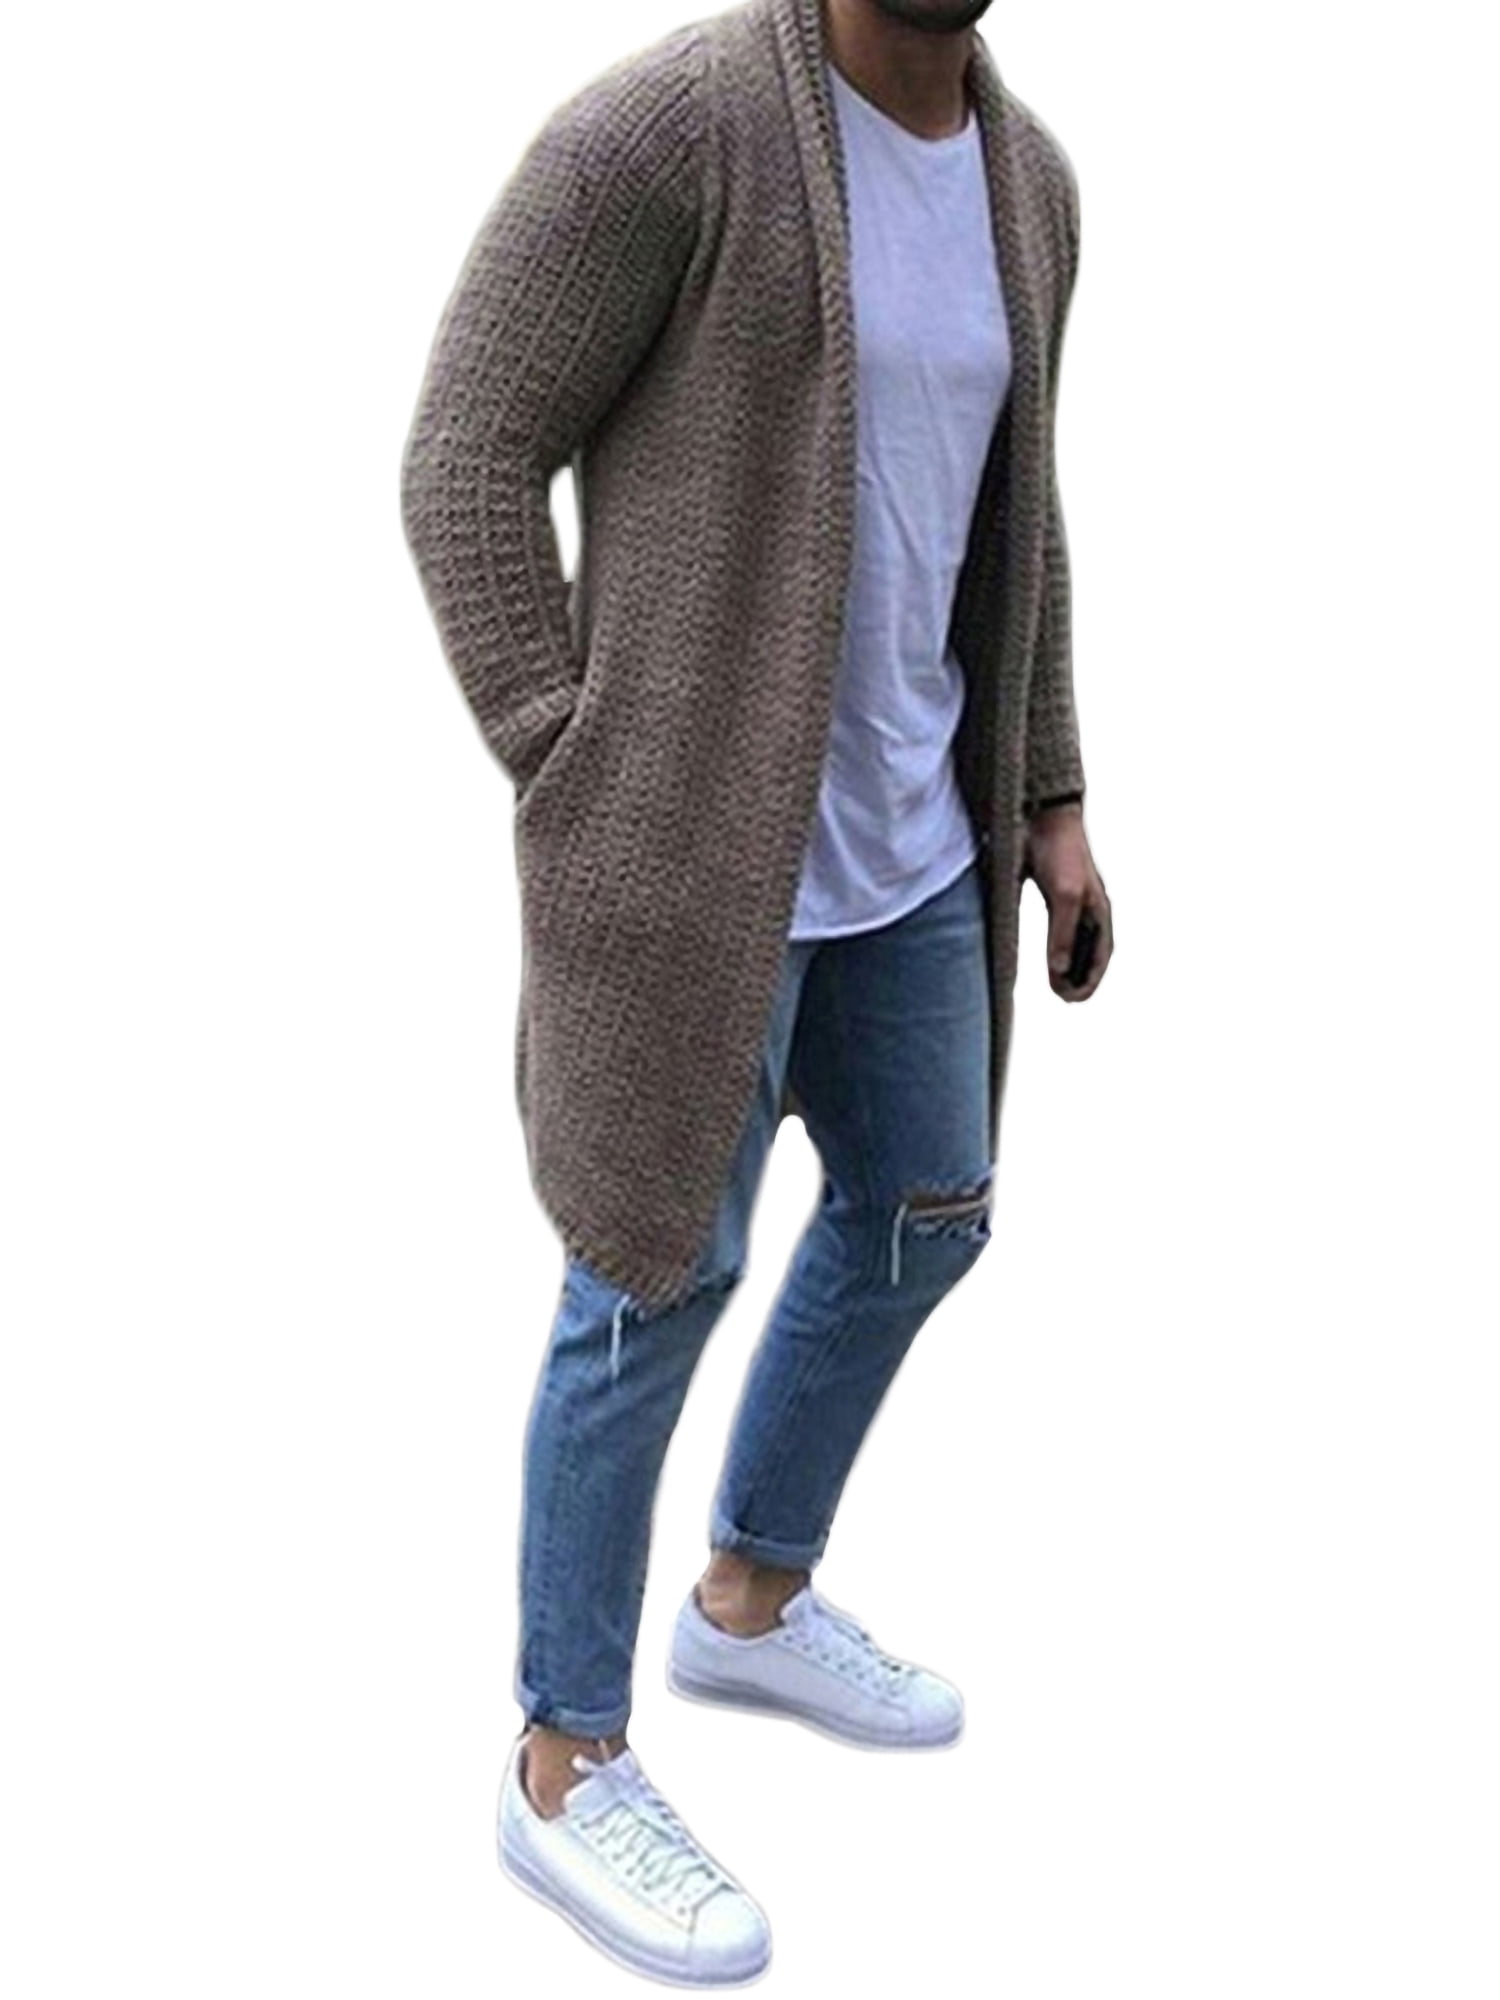 Mens Cardigan Long Shawl Collar Sweater Chunky Knit Slim Fit Autumn Winter Open Front Jacket Knitwear with Pockets